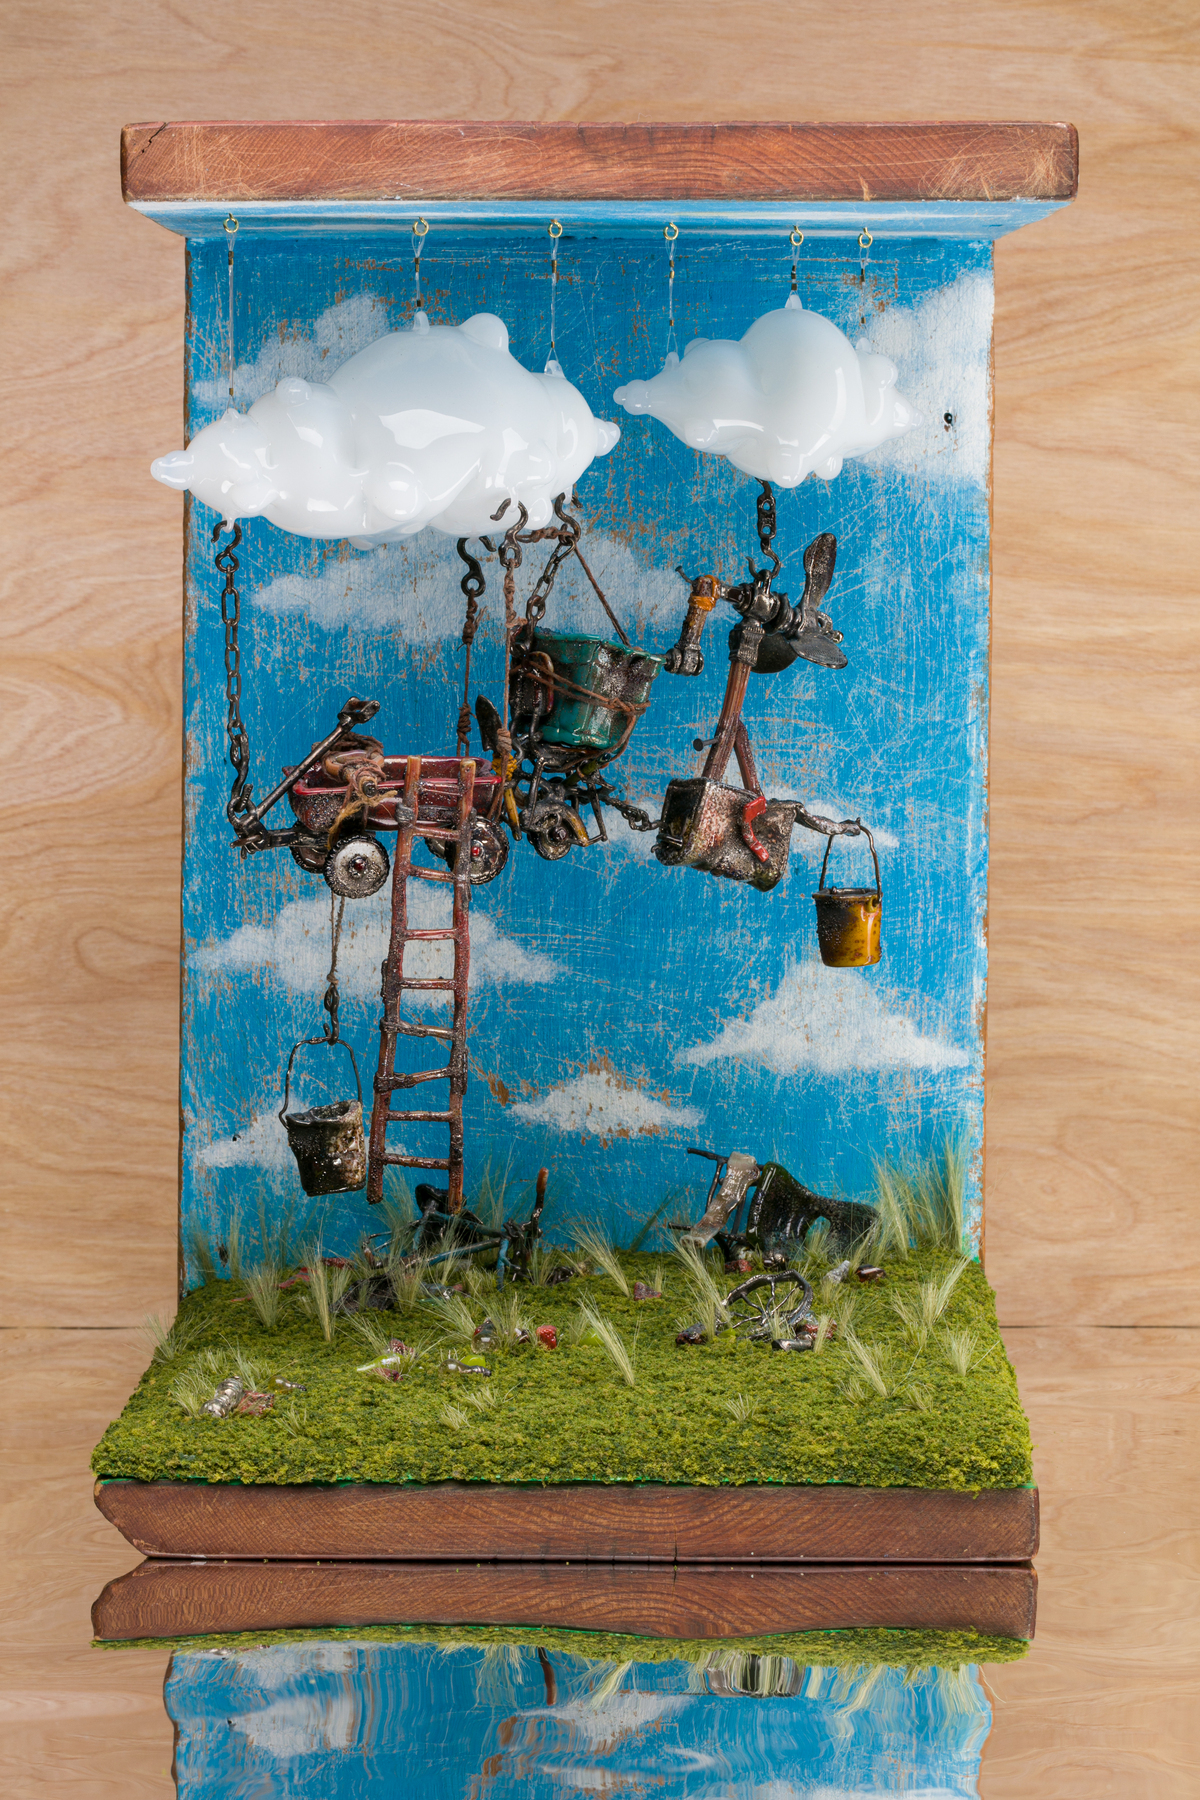 Cloud Riding Contraption by Kimberly Thomas